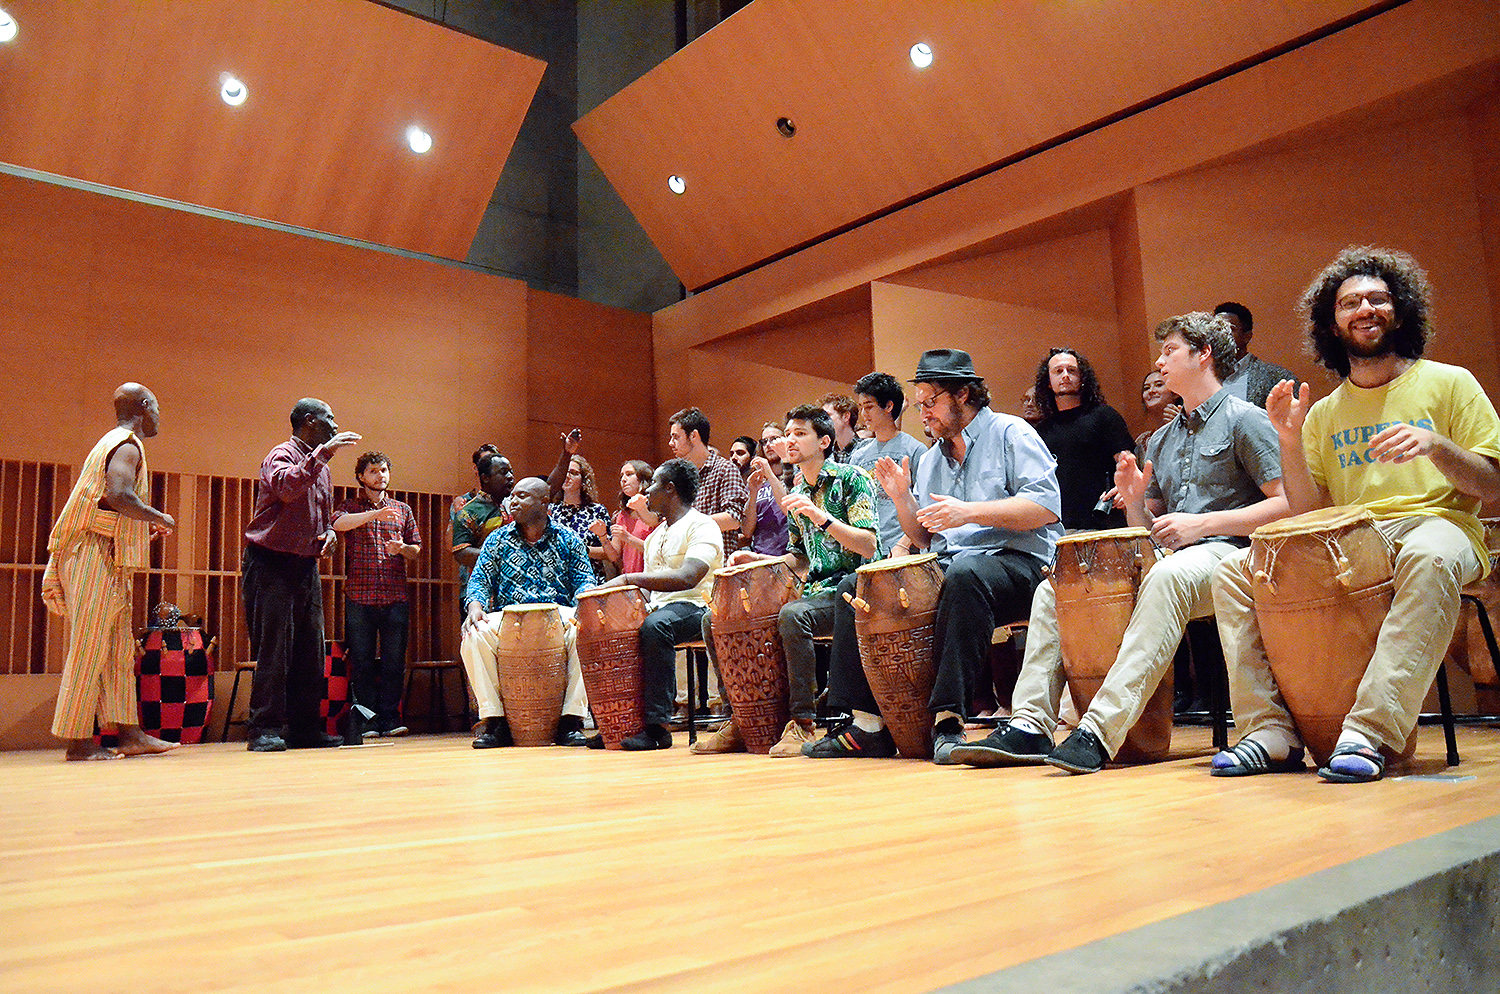 Participants in the West African Drumming and Dance workshop performed in Crowell Concert Hall on Nov. 7, with retiring Adjunct Professor of Music Abraham Adzenyah and alumni accompanying on drums. Current Wesleyan students also performed. (Photo by John Van Vlack)